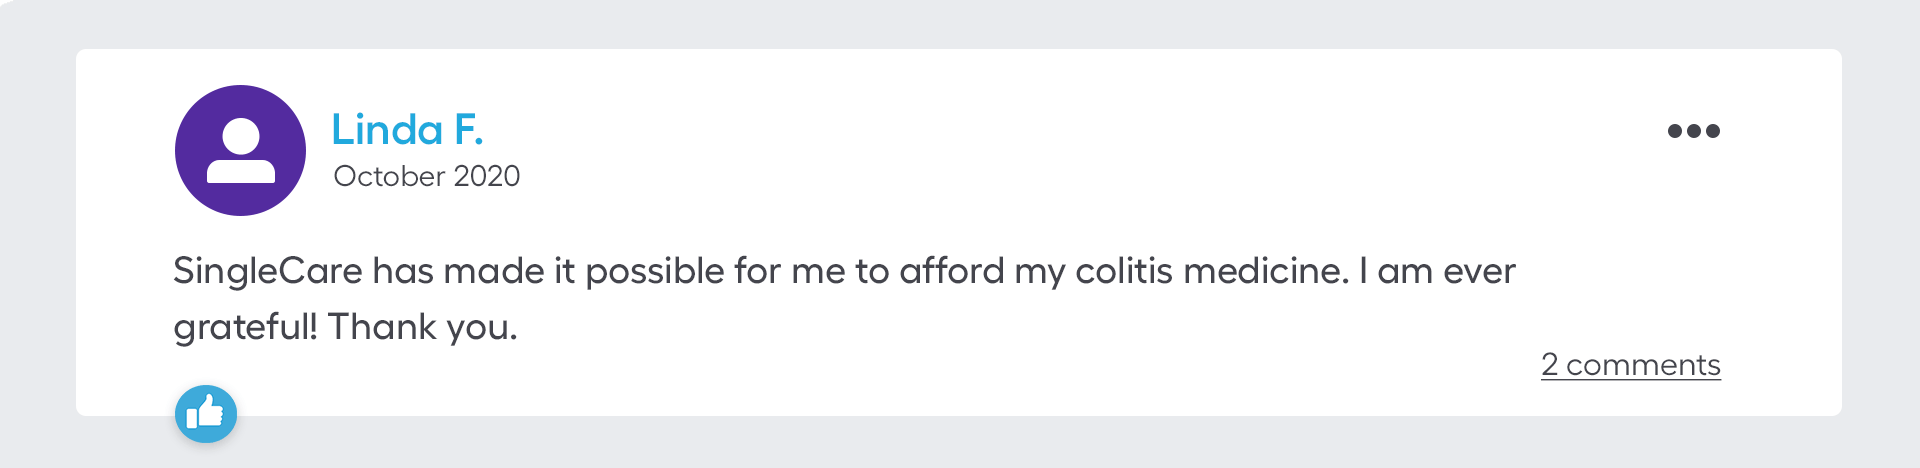 SingleCare has made it possible for me to afford me colitis medicine. I am ever grateful! Thank you.